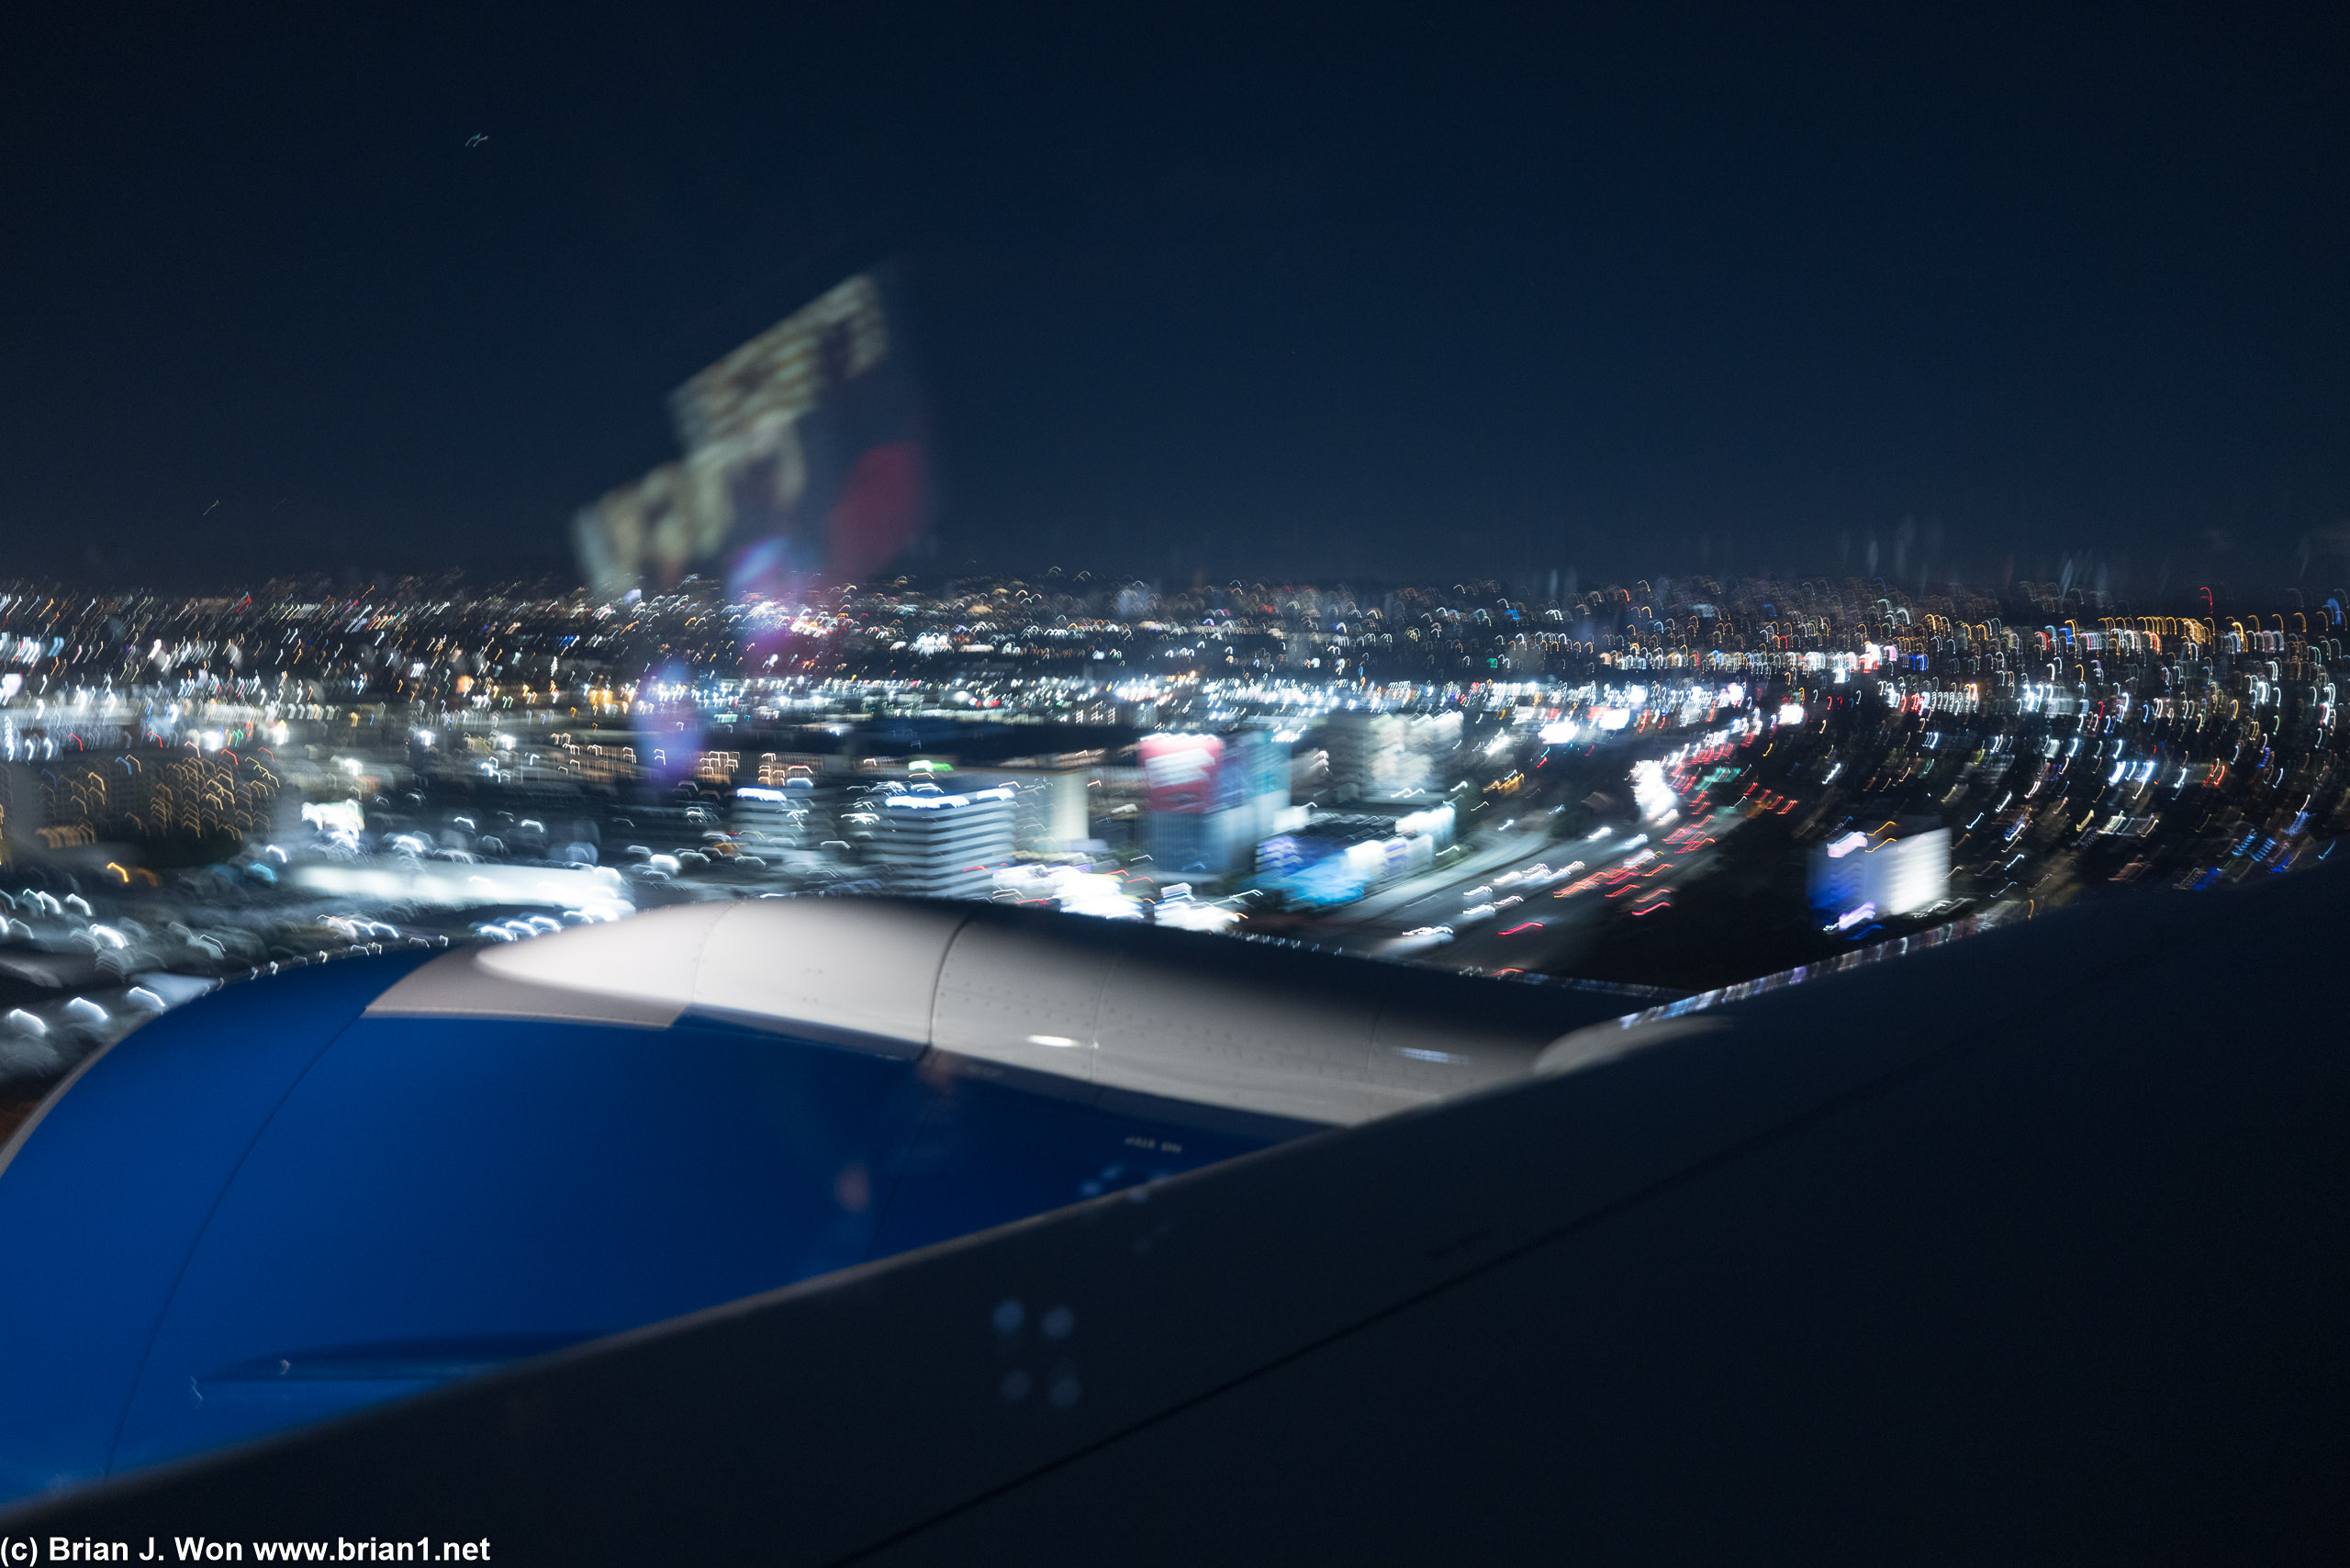 Flying over I-405, just seconds from touchdown at LAX.